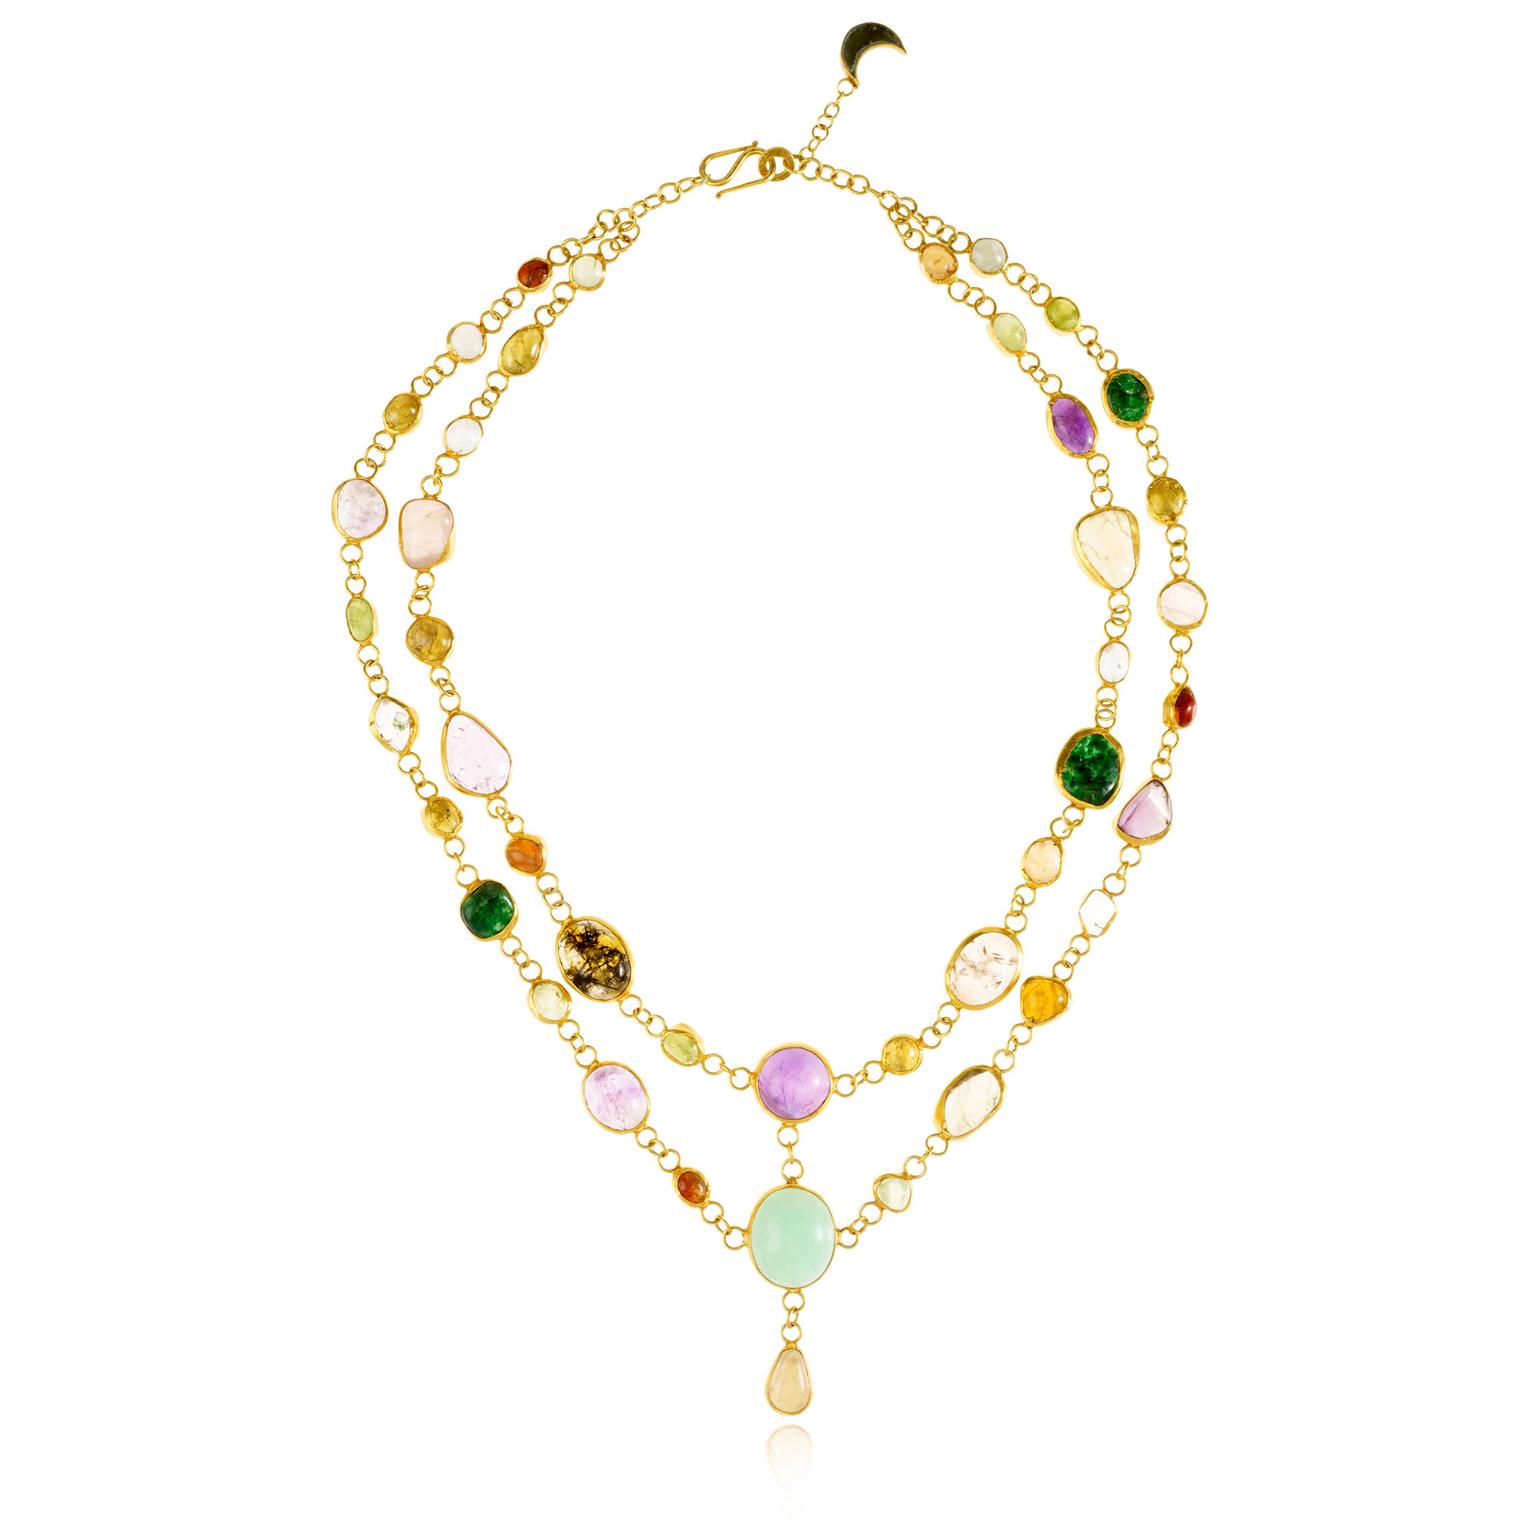 Pippa Small gold-plated silver and coloured gemstone necklace